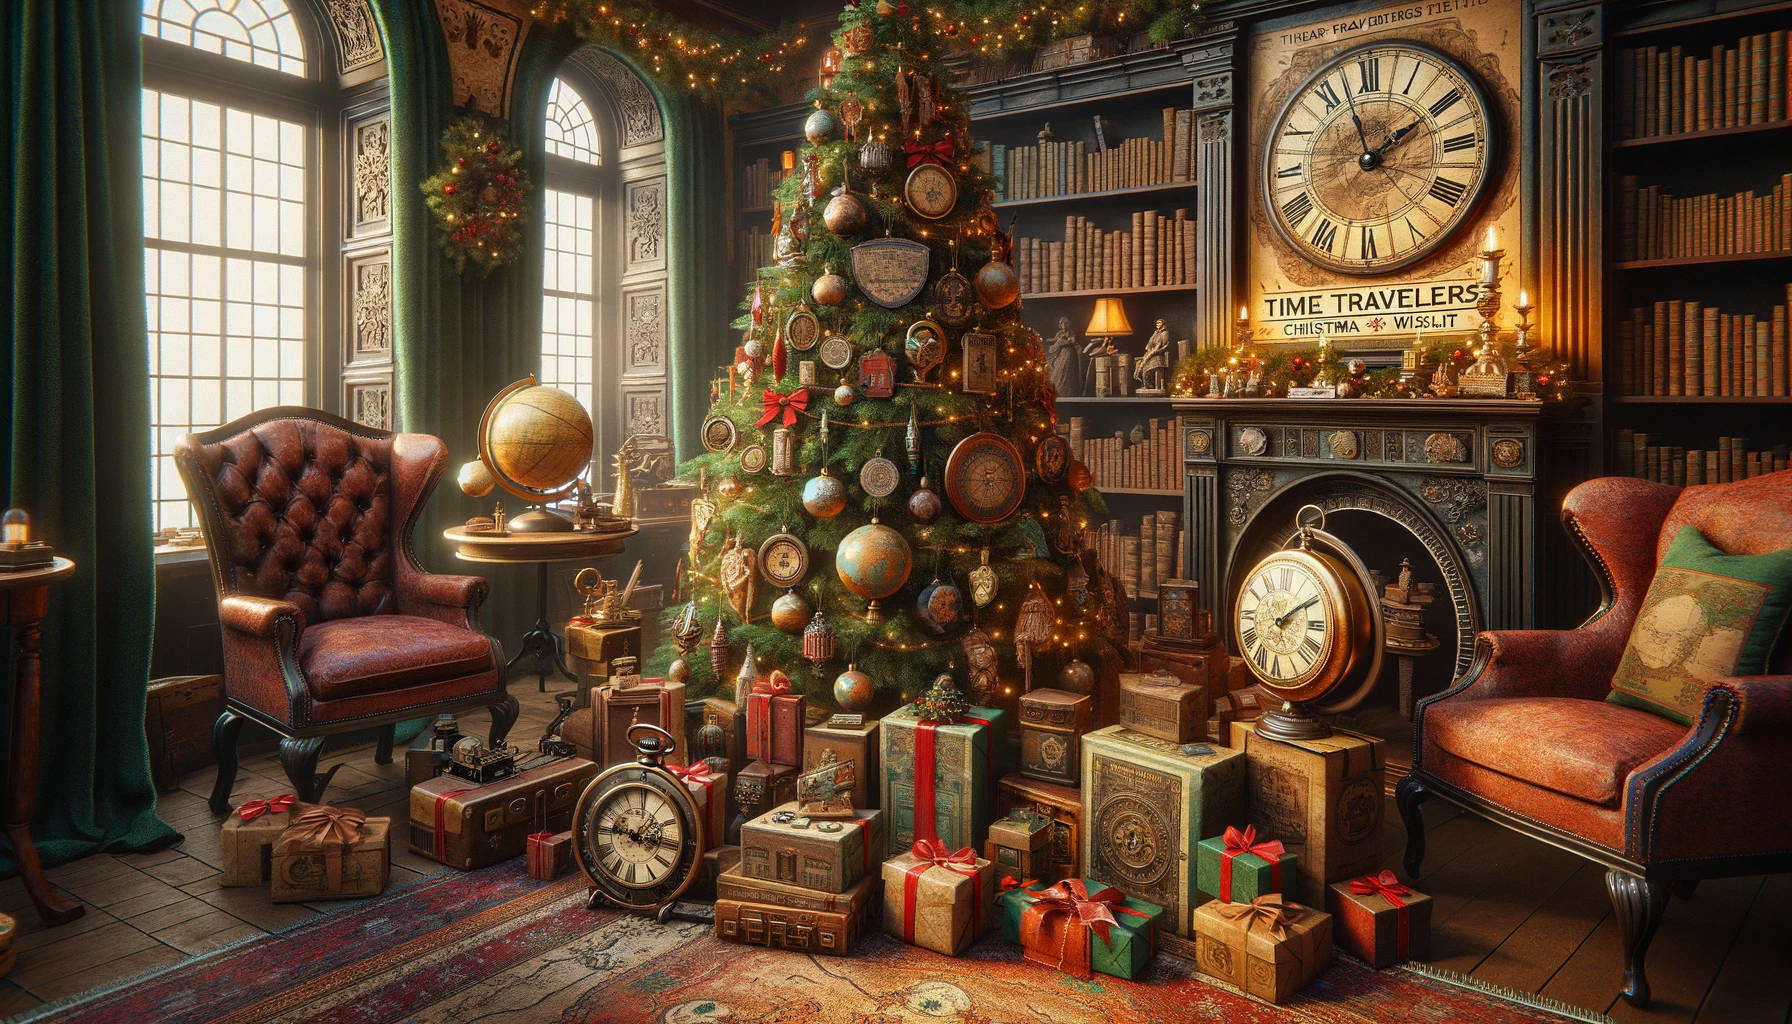 Time Travelers’ Christmas Wishlist: Unique Gifts for History Buffs